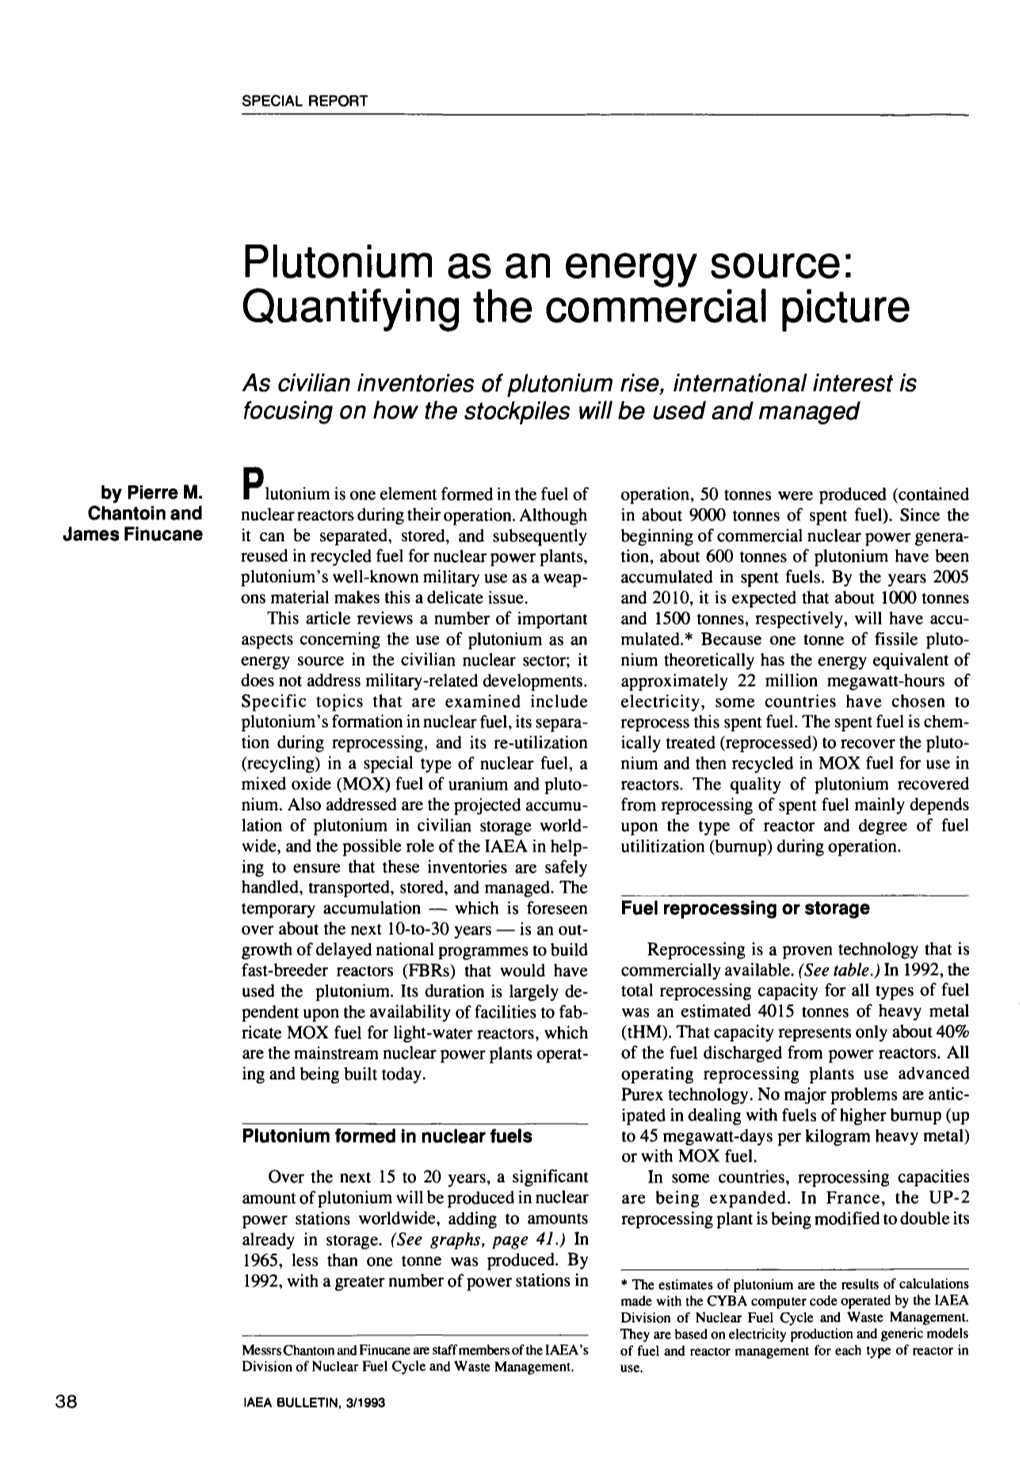 Plutonium As an Energy Source: Quantifying the Commercial Picture